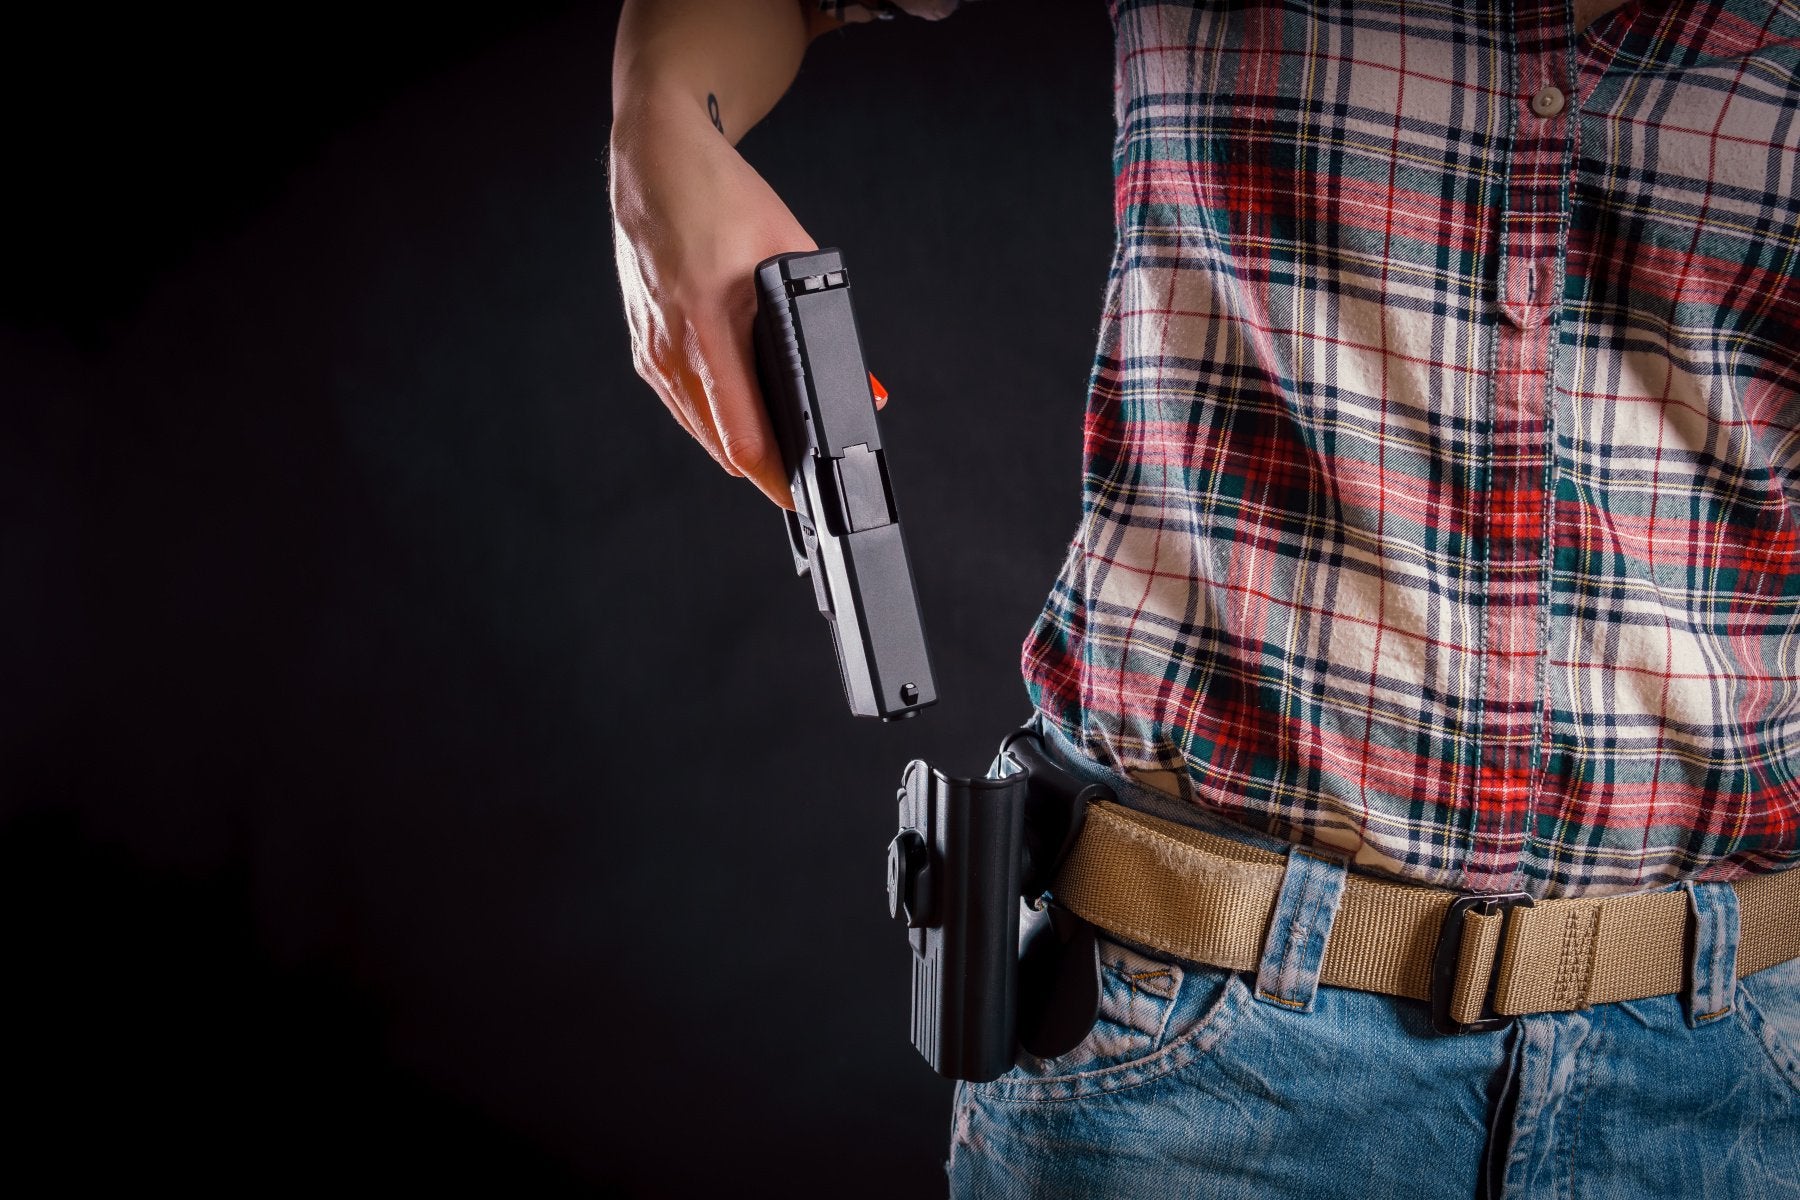 How to Wear a Concealed Carry Holster